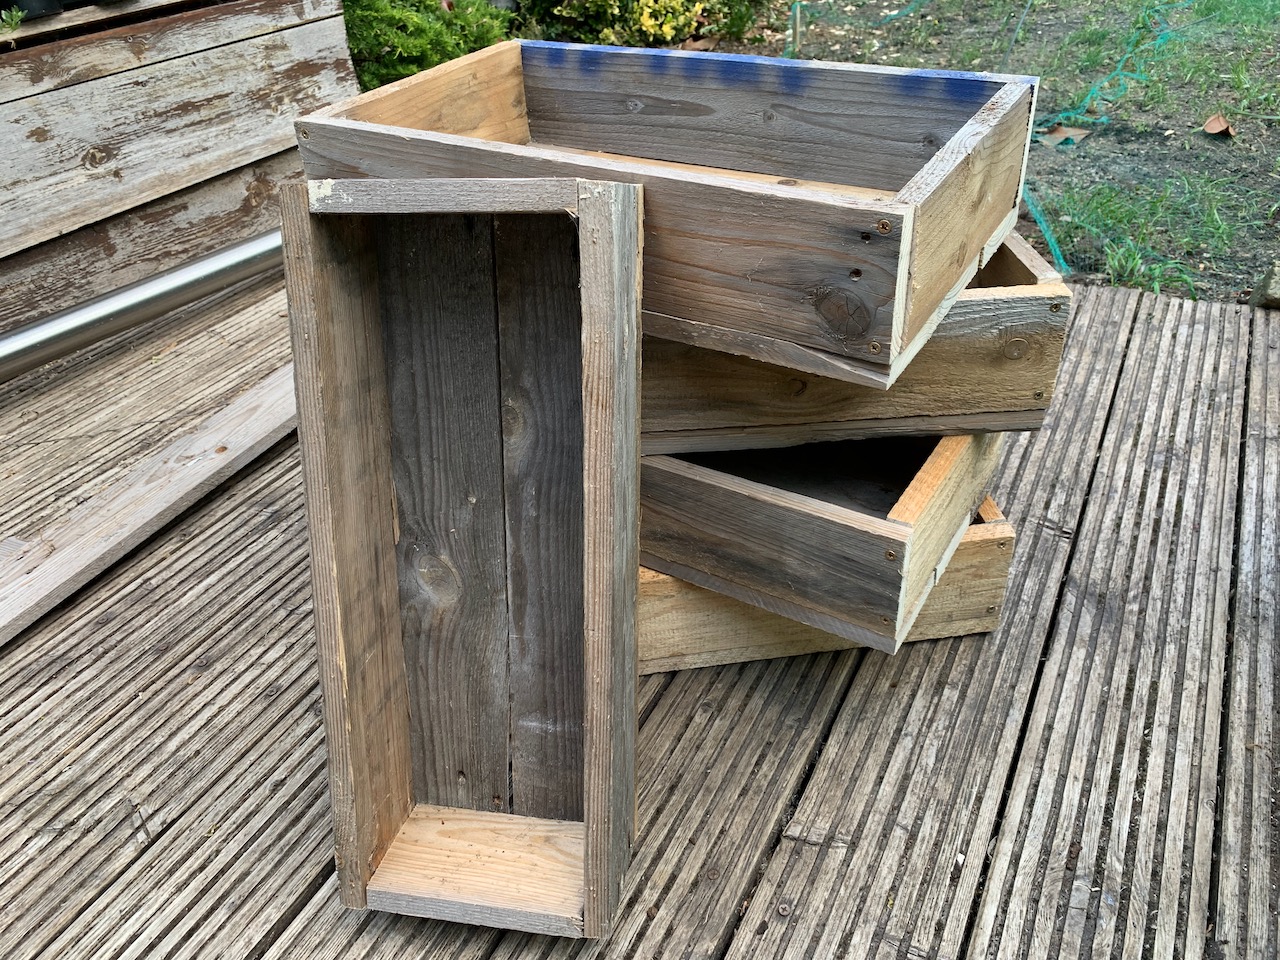 Planters and Window Boxes from old shipping pallets